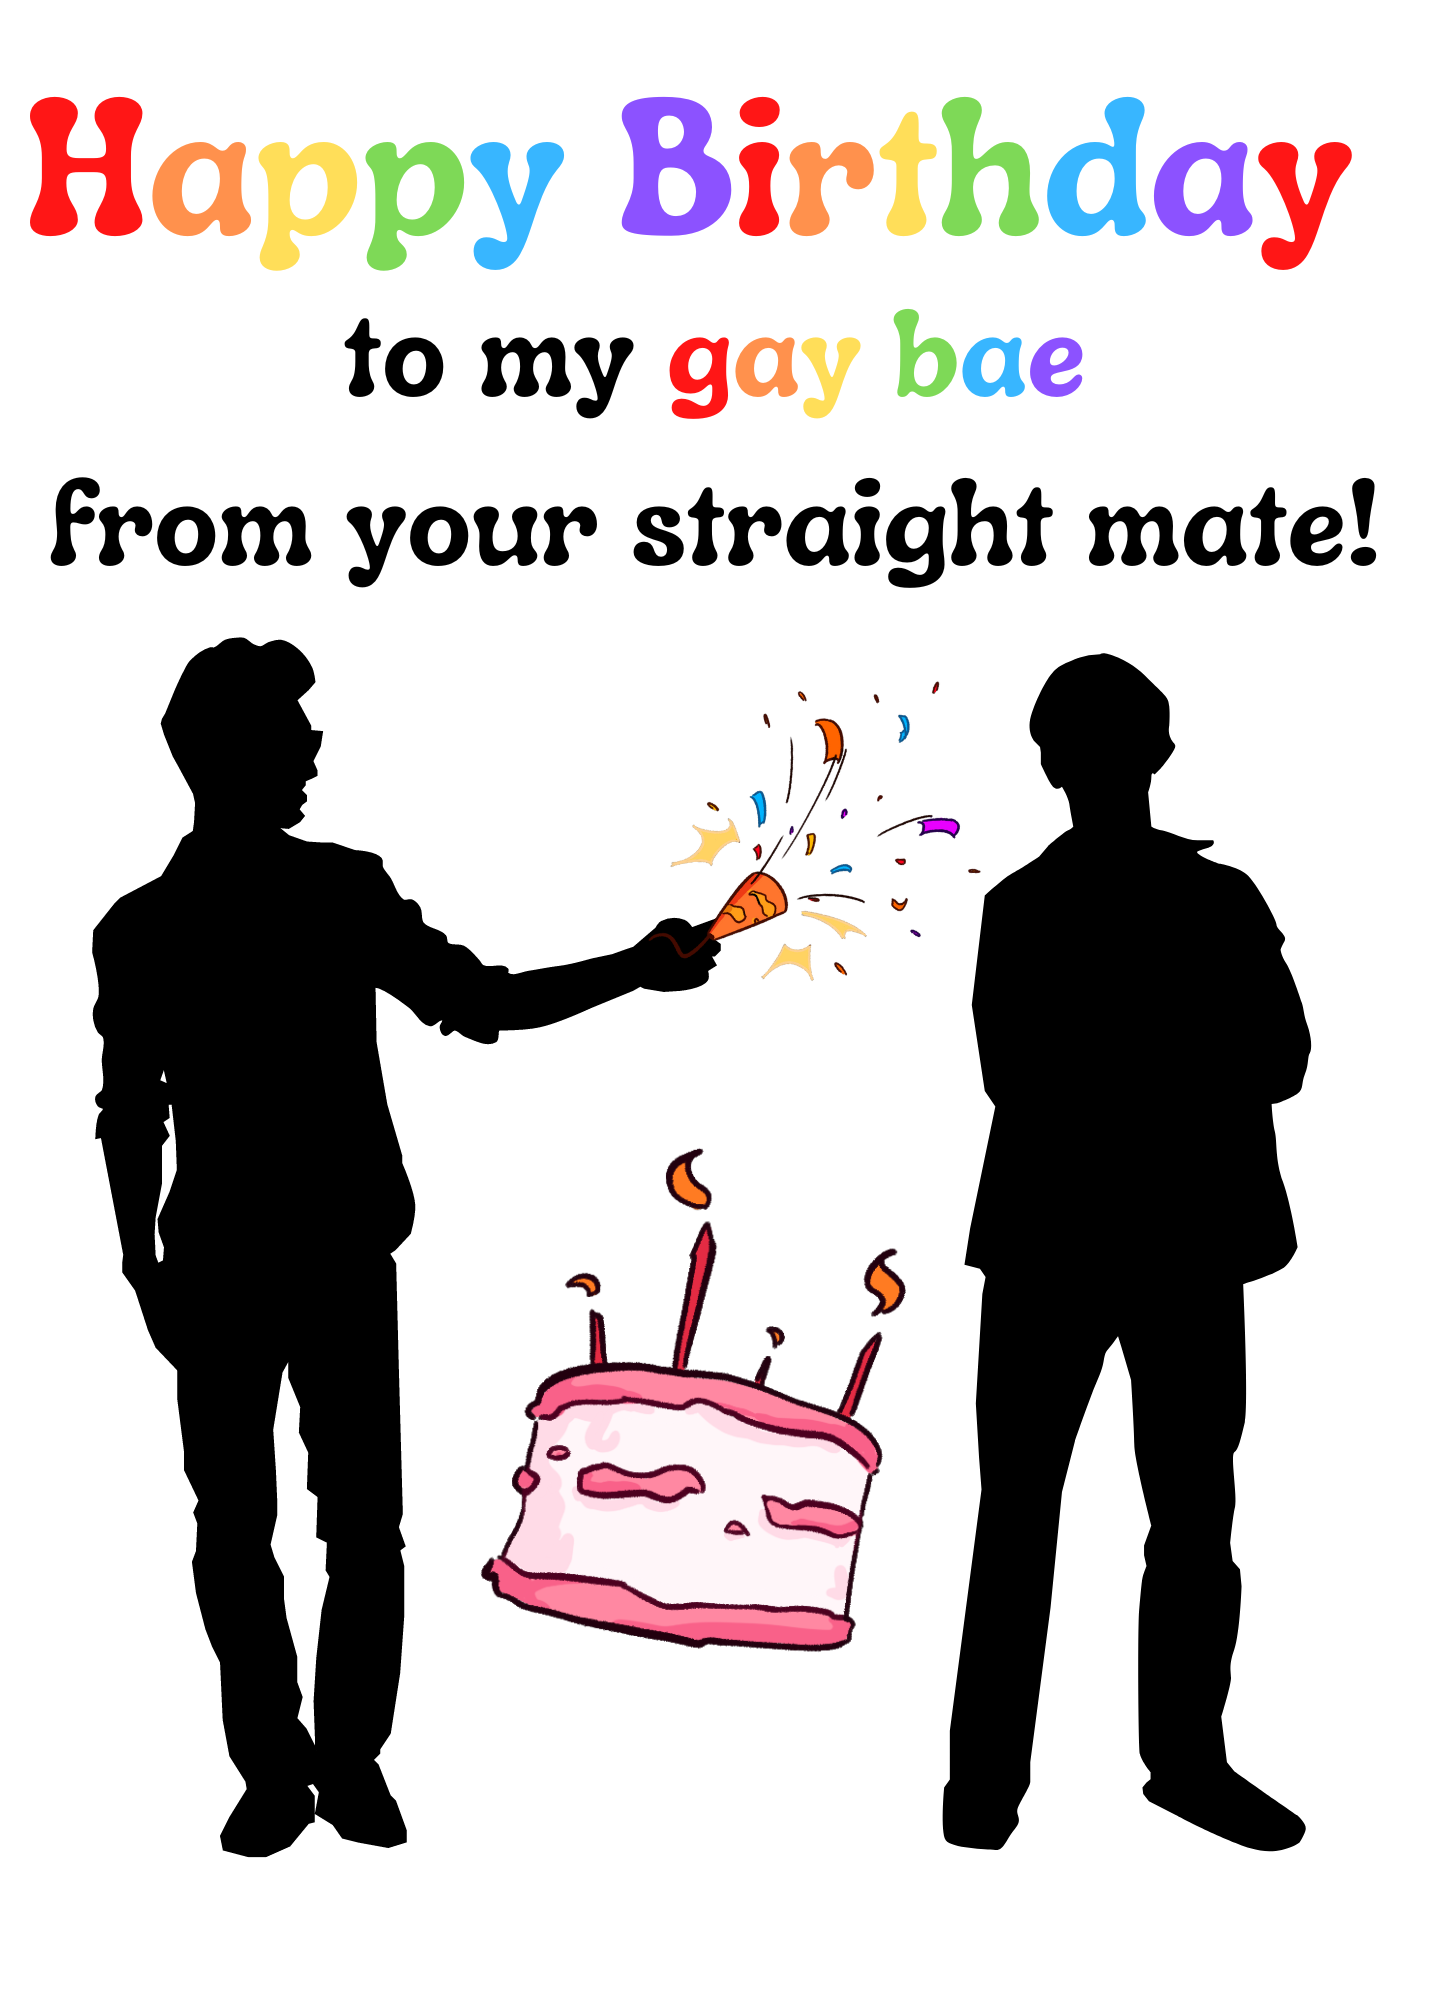 Happy Birthday to my gay bae from your straight mate featuring male characters